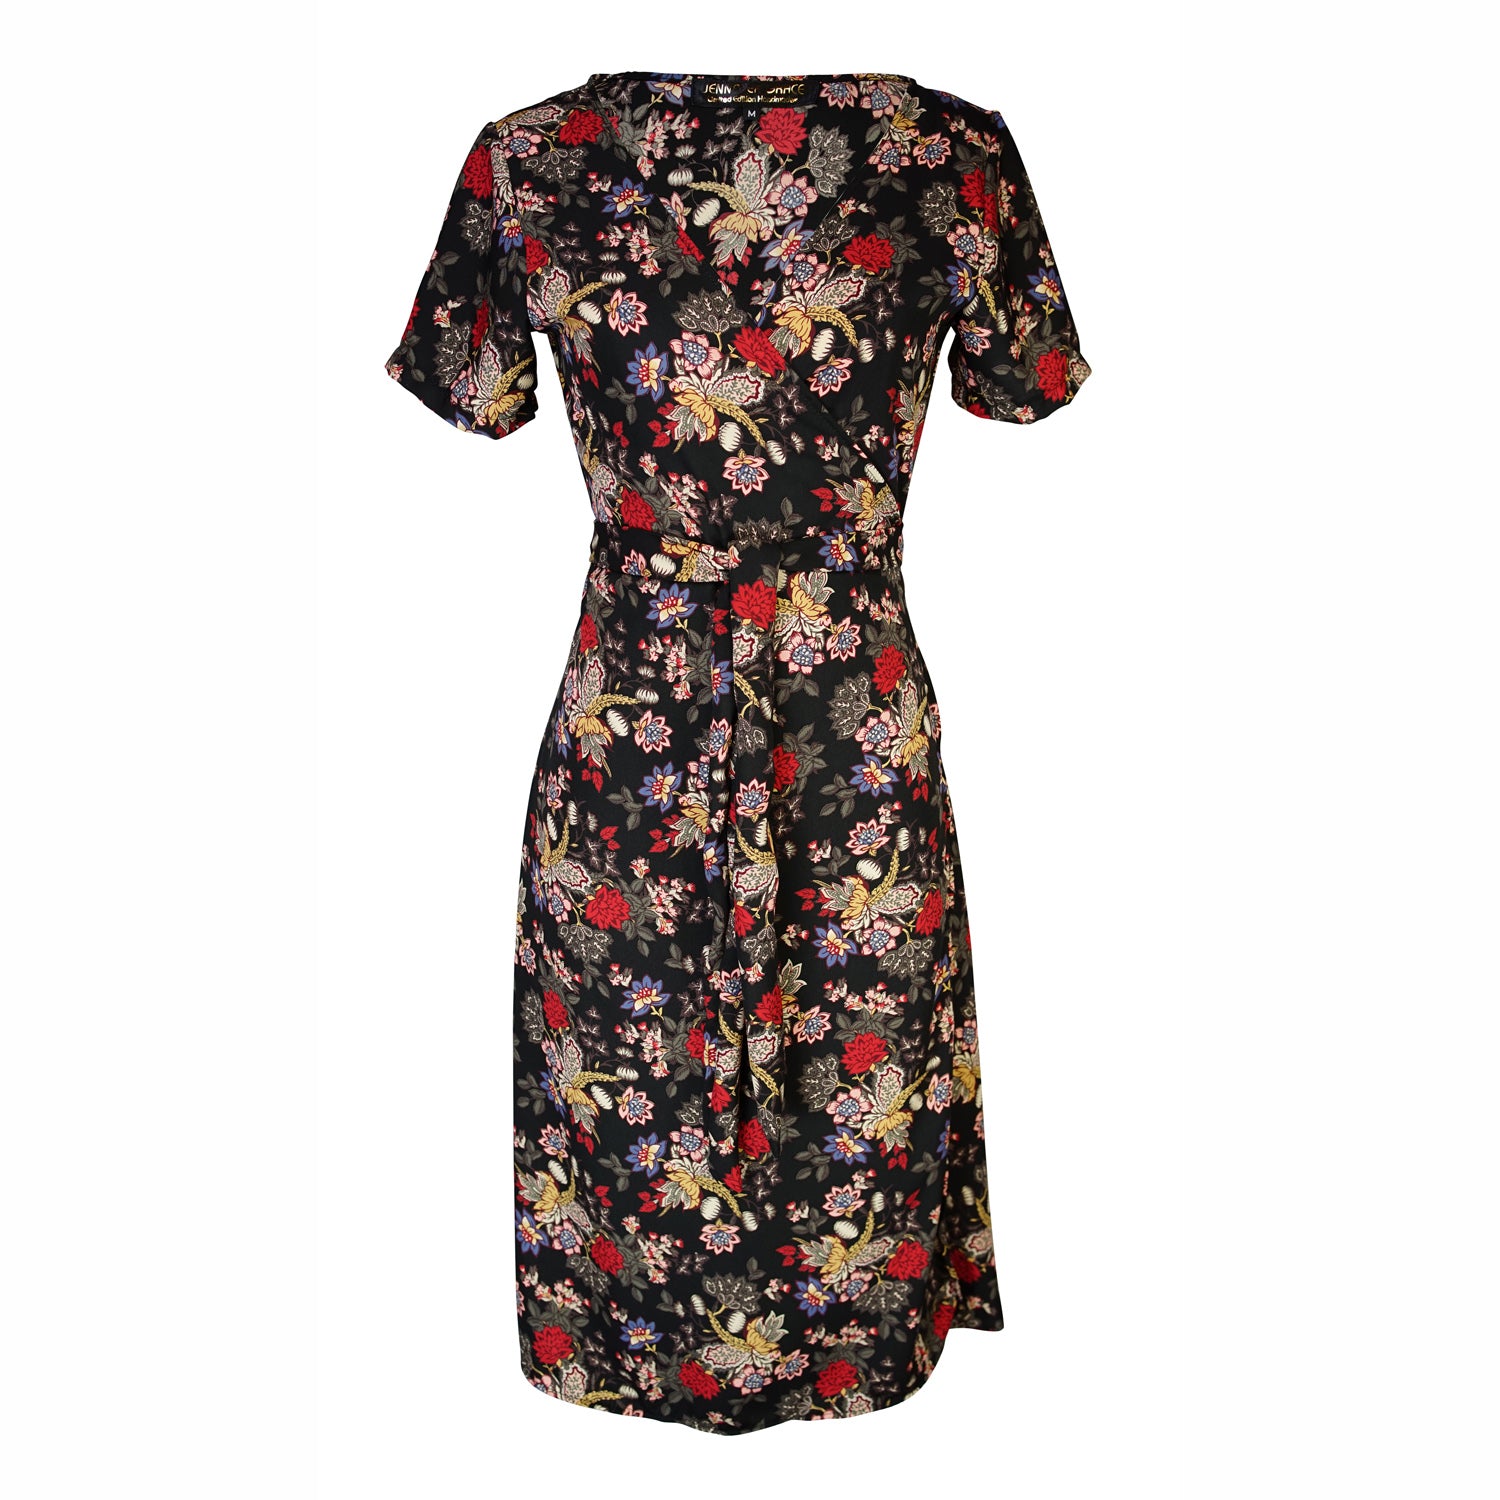 Short-sleeve, v-neck wrap dress. Midi in length, with black base with multicolor vintage-inspired botanical floral flower print. Bohemian summer dress in style.